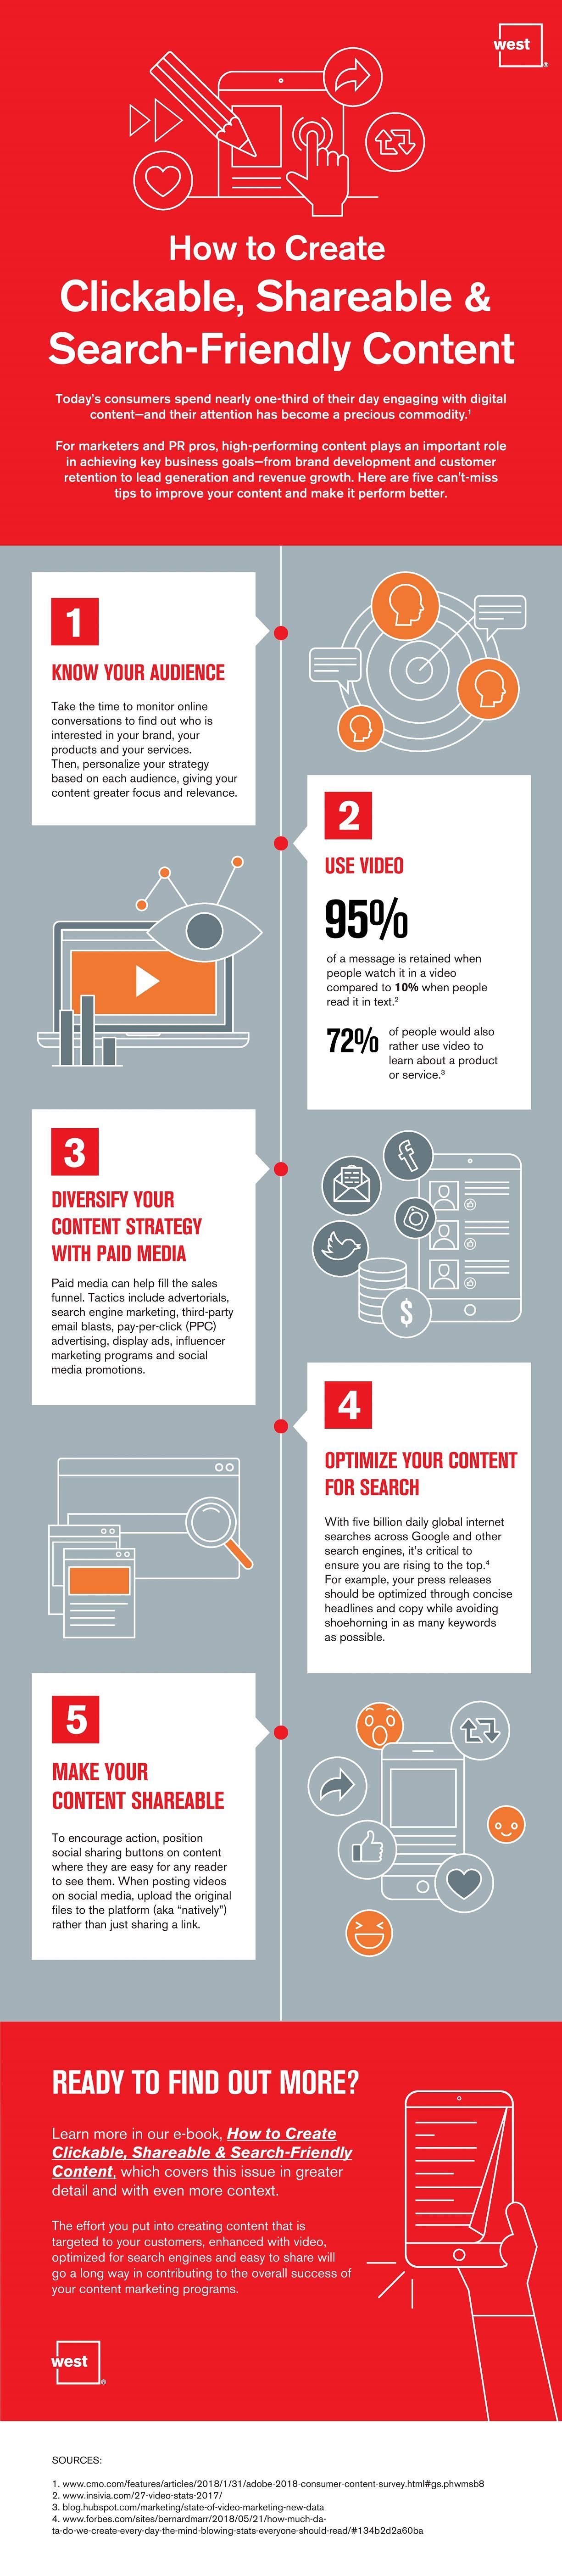 Five Can’t-Miss Tips for Better Performing Content #infographic